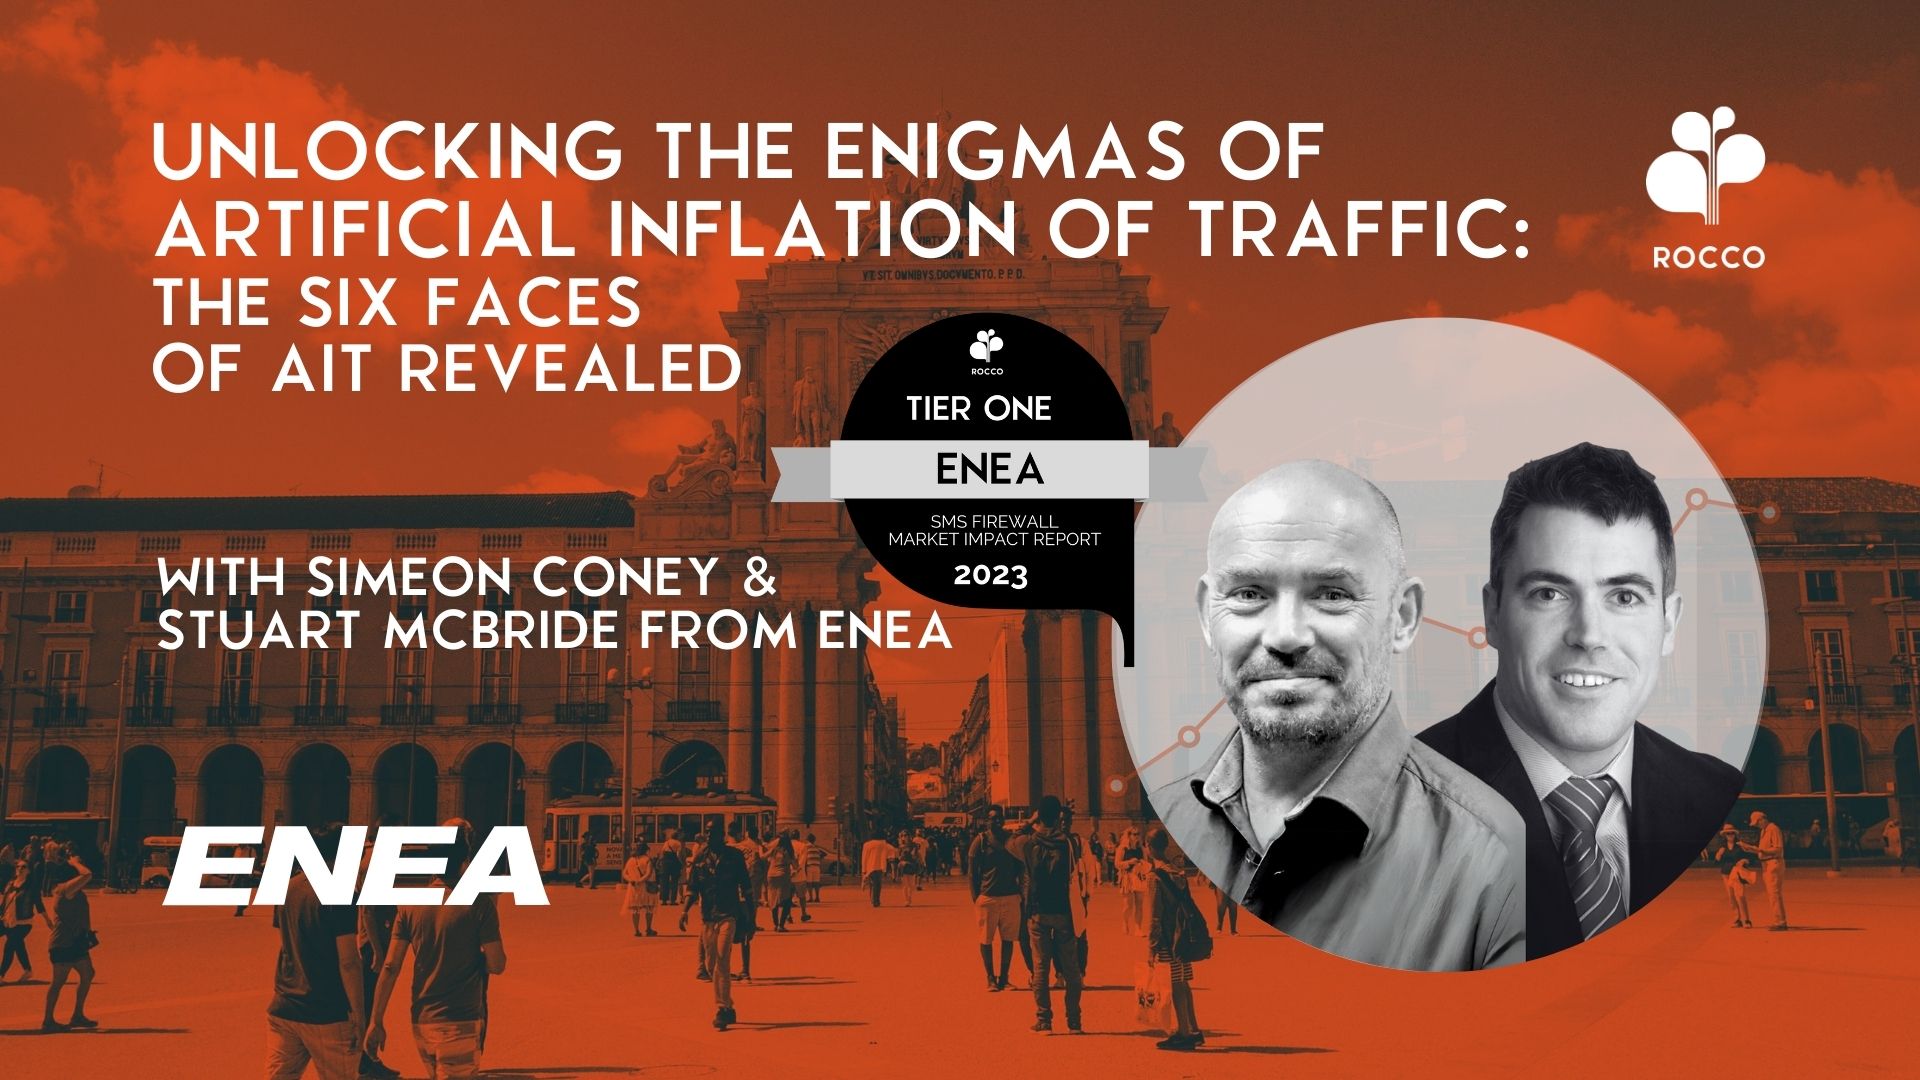 Unlocking the Enigmas of Artificial Inflation of Traffic: The Six Faces of AIT Revealed